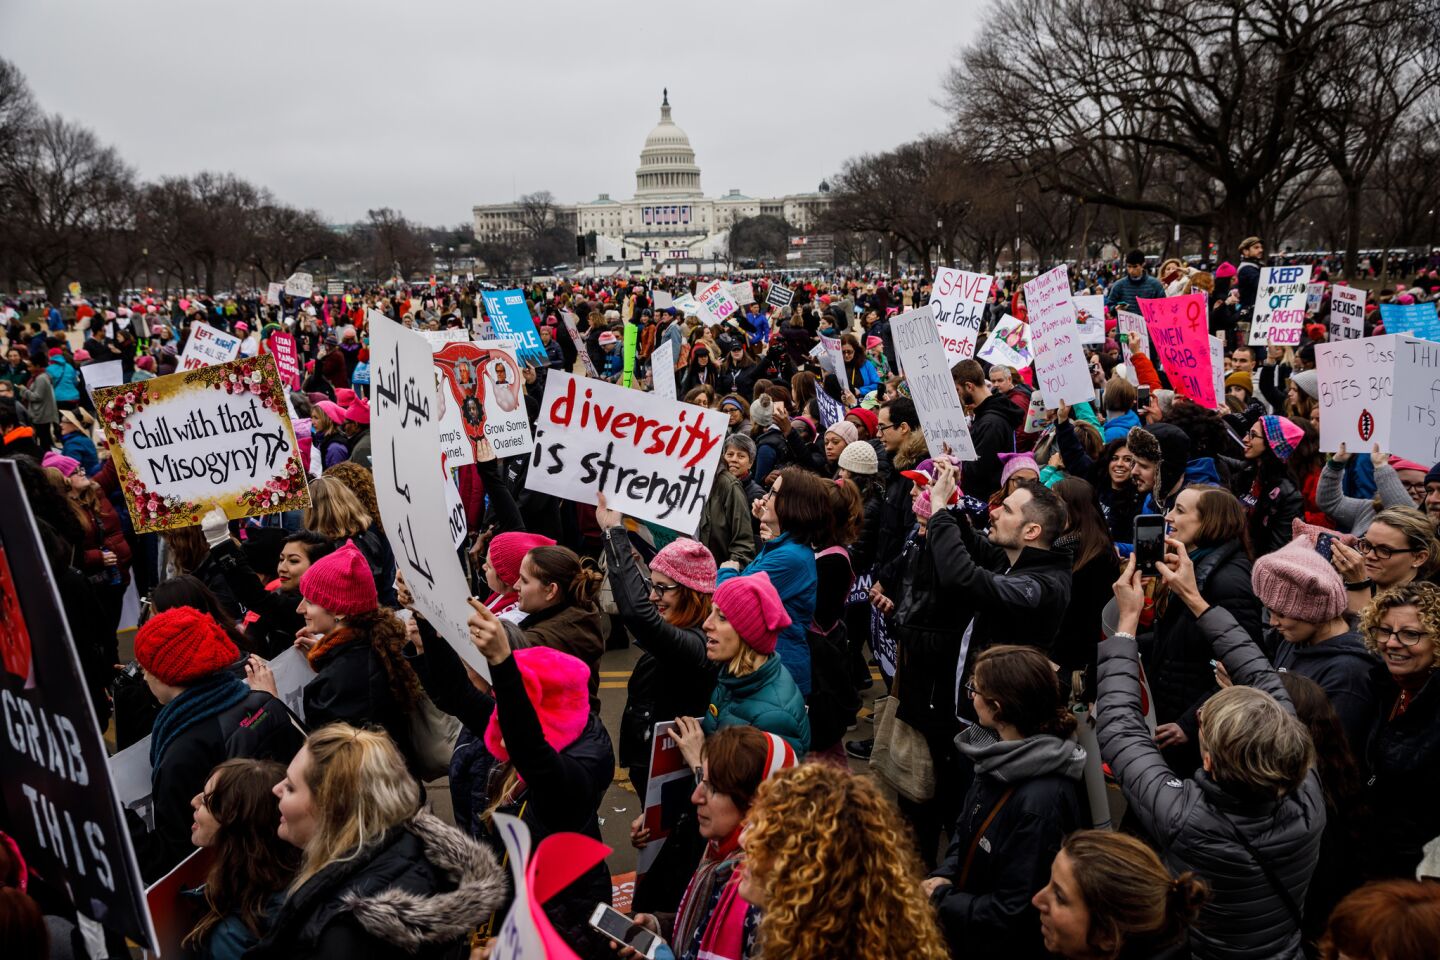 WASHINGTON, D.C. -- SATURDAY, JANUARY 21, 2017: Thousands of people march for women's rights on 7th Street SW past the U.S. Capitol at the Women's March on Washington event in Washington, D.C., on Jan. 21, 2017. (Marcus Yam / Los Angeles Times)